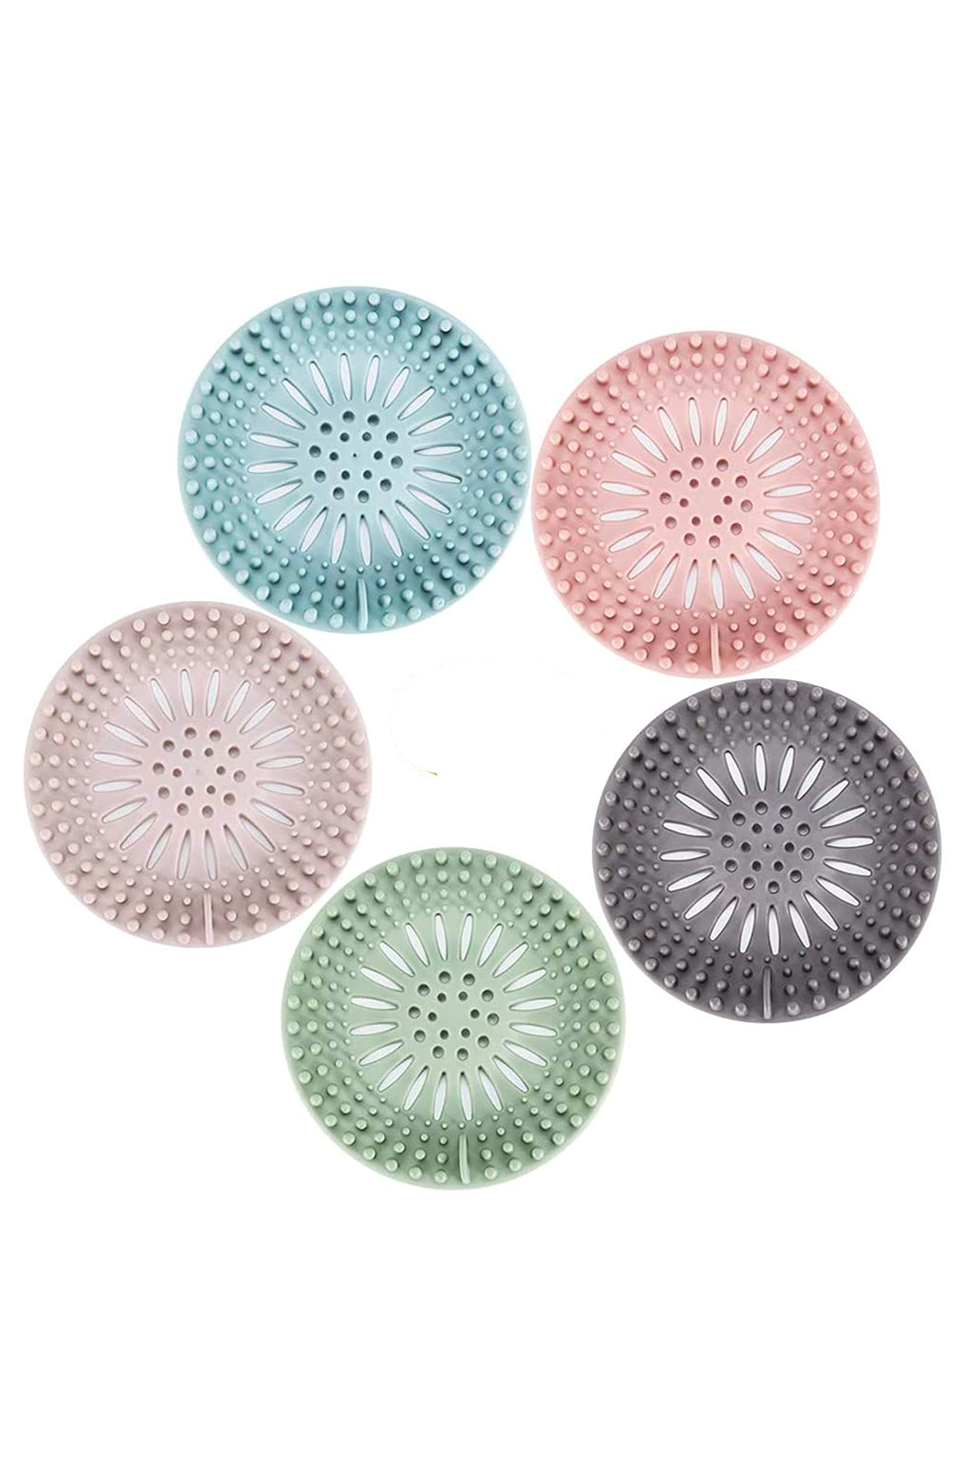 Hair Drain Catcher,Square Drain Cover for Shower Silicone Hair Stopper with Suction Cup,Easy to Install Suit for Bathroom,Bathtub,Kitchen 2 Pack